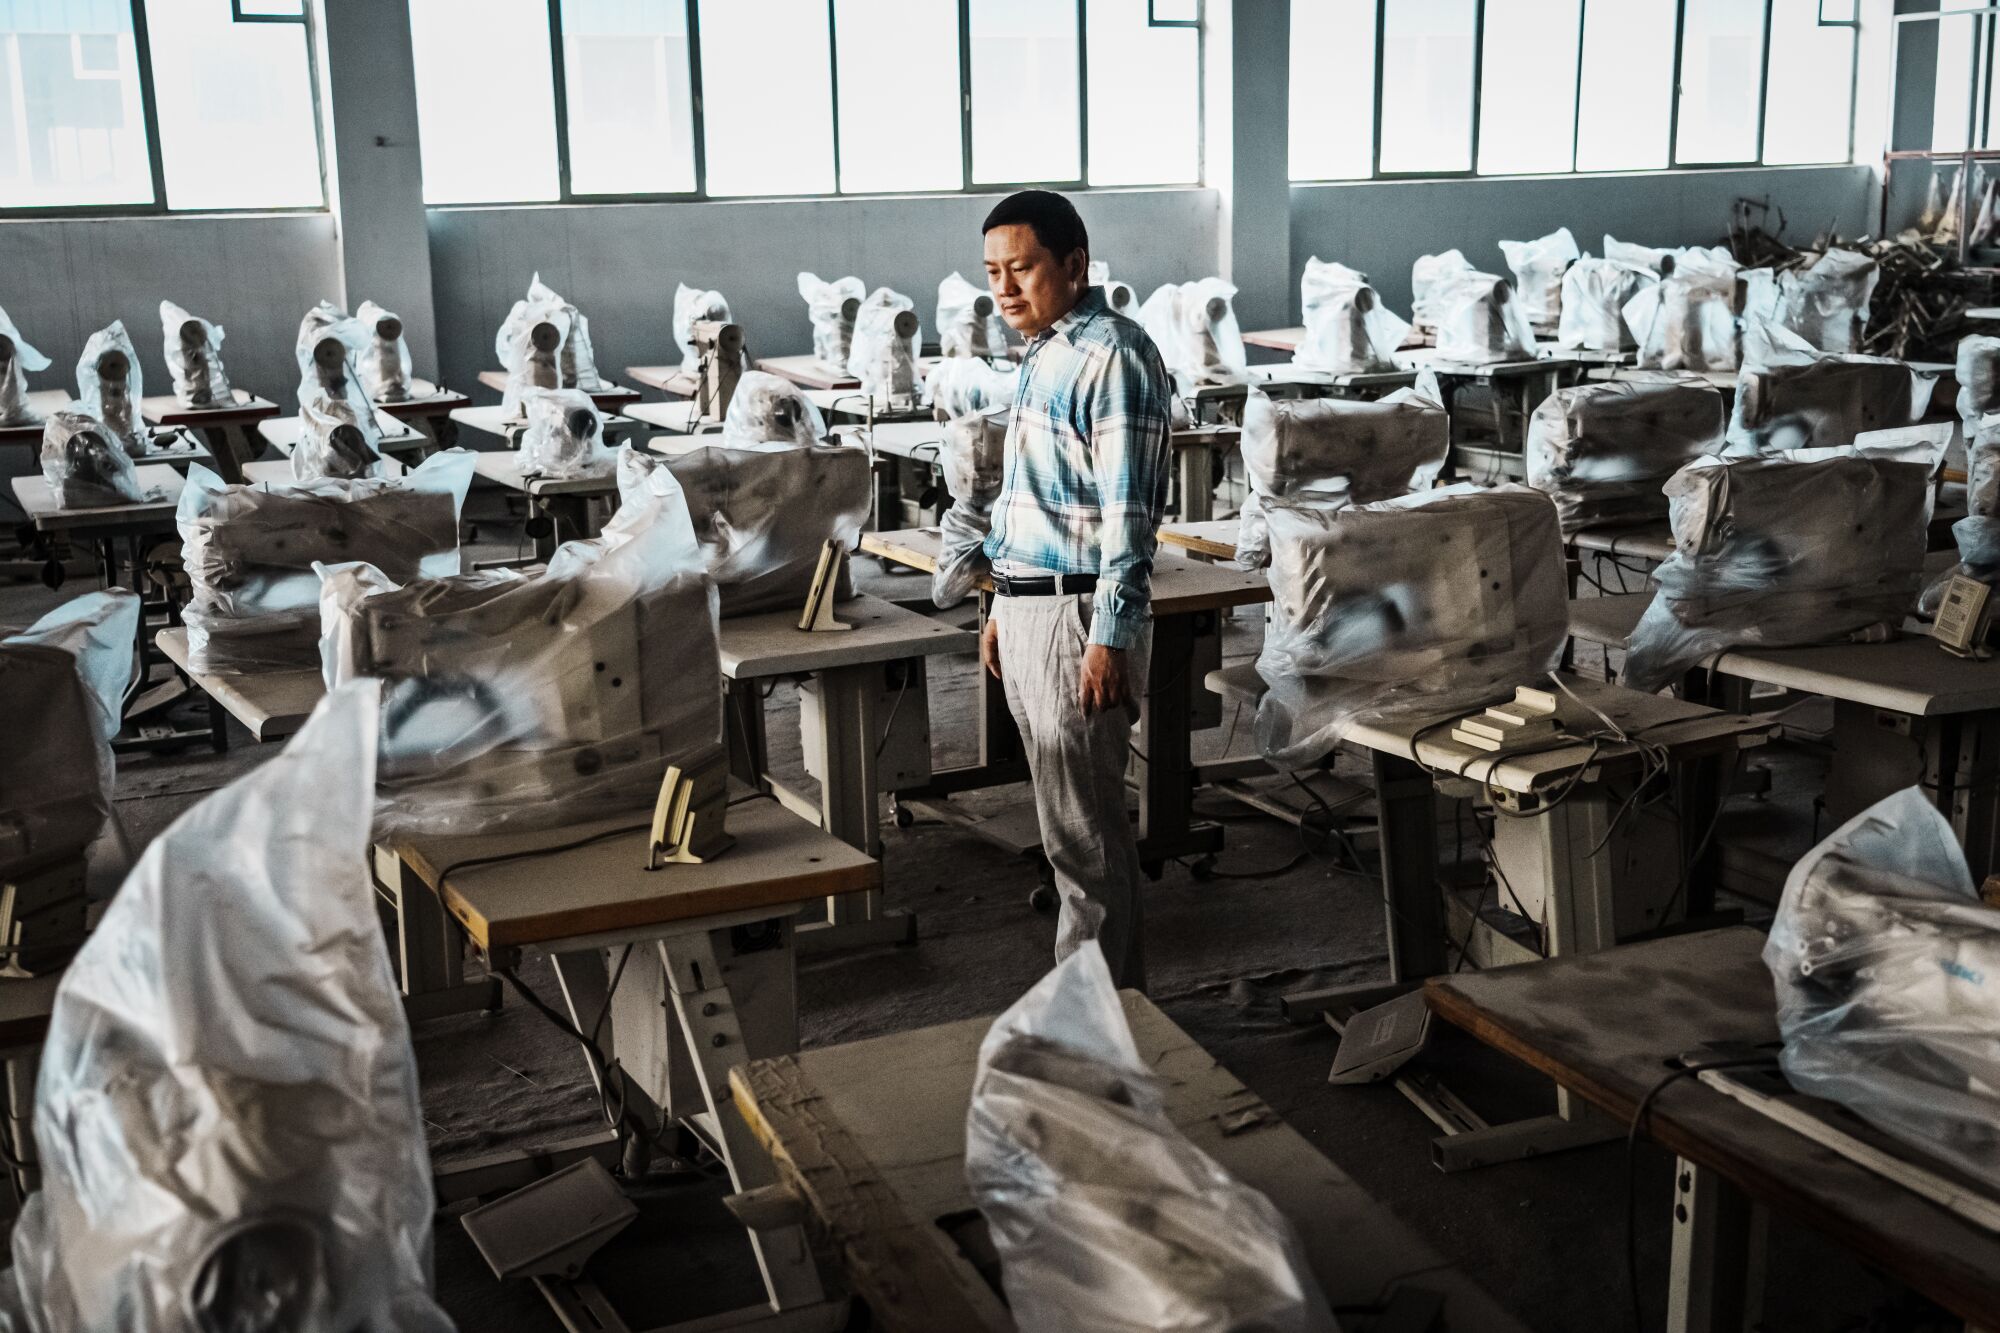 A man stands among sewing machines wrapped in plastic dust covers